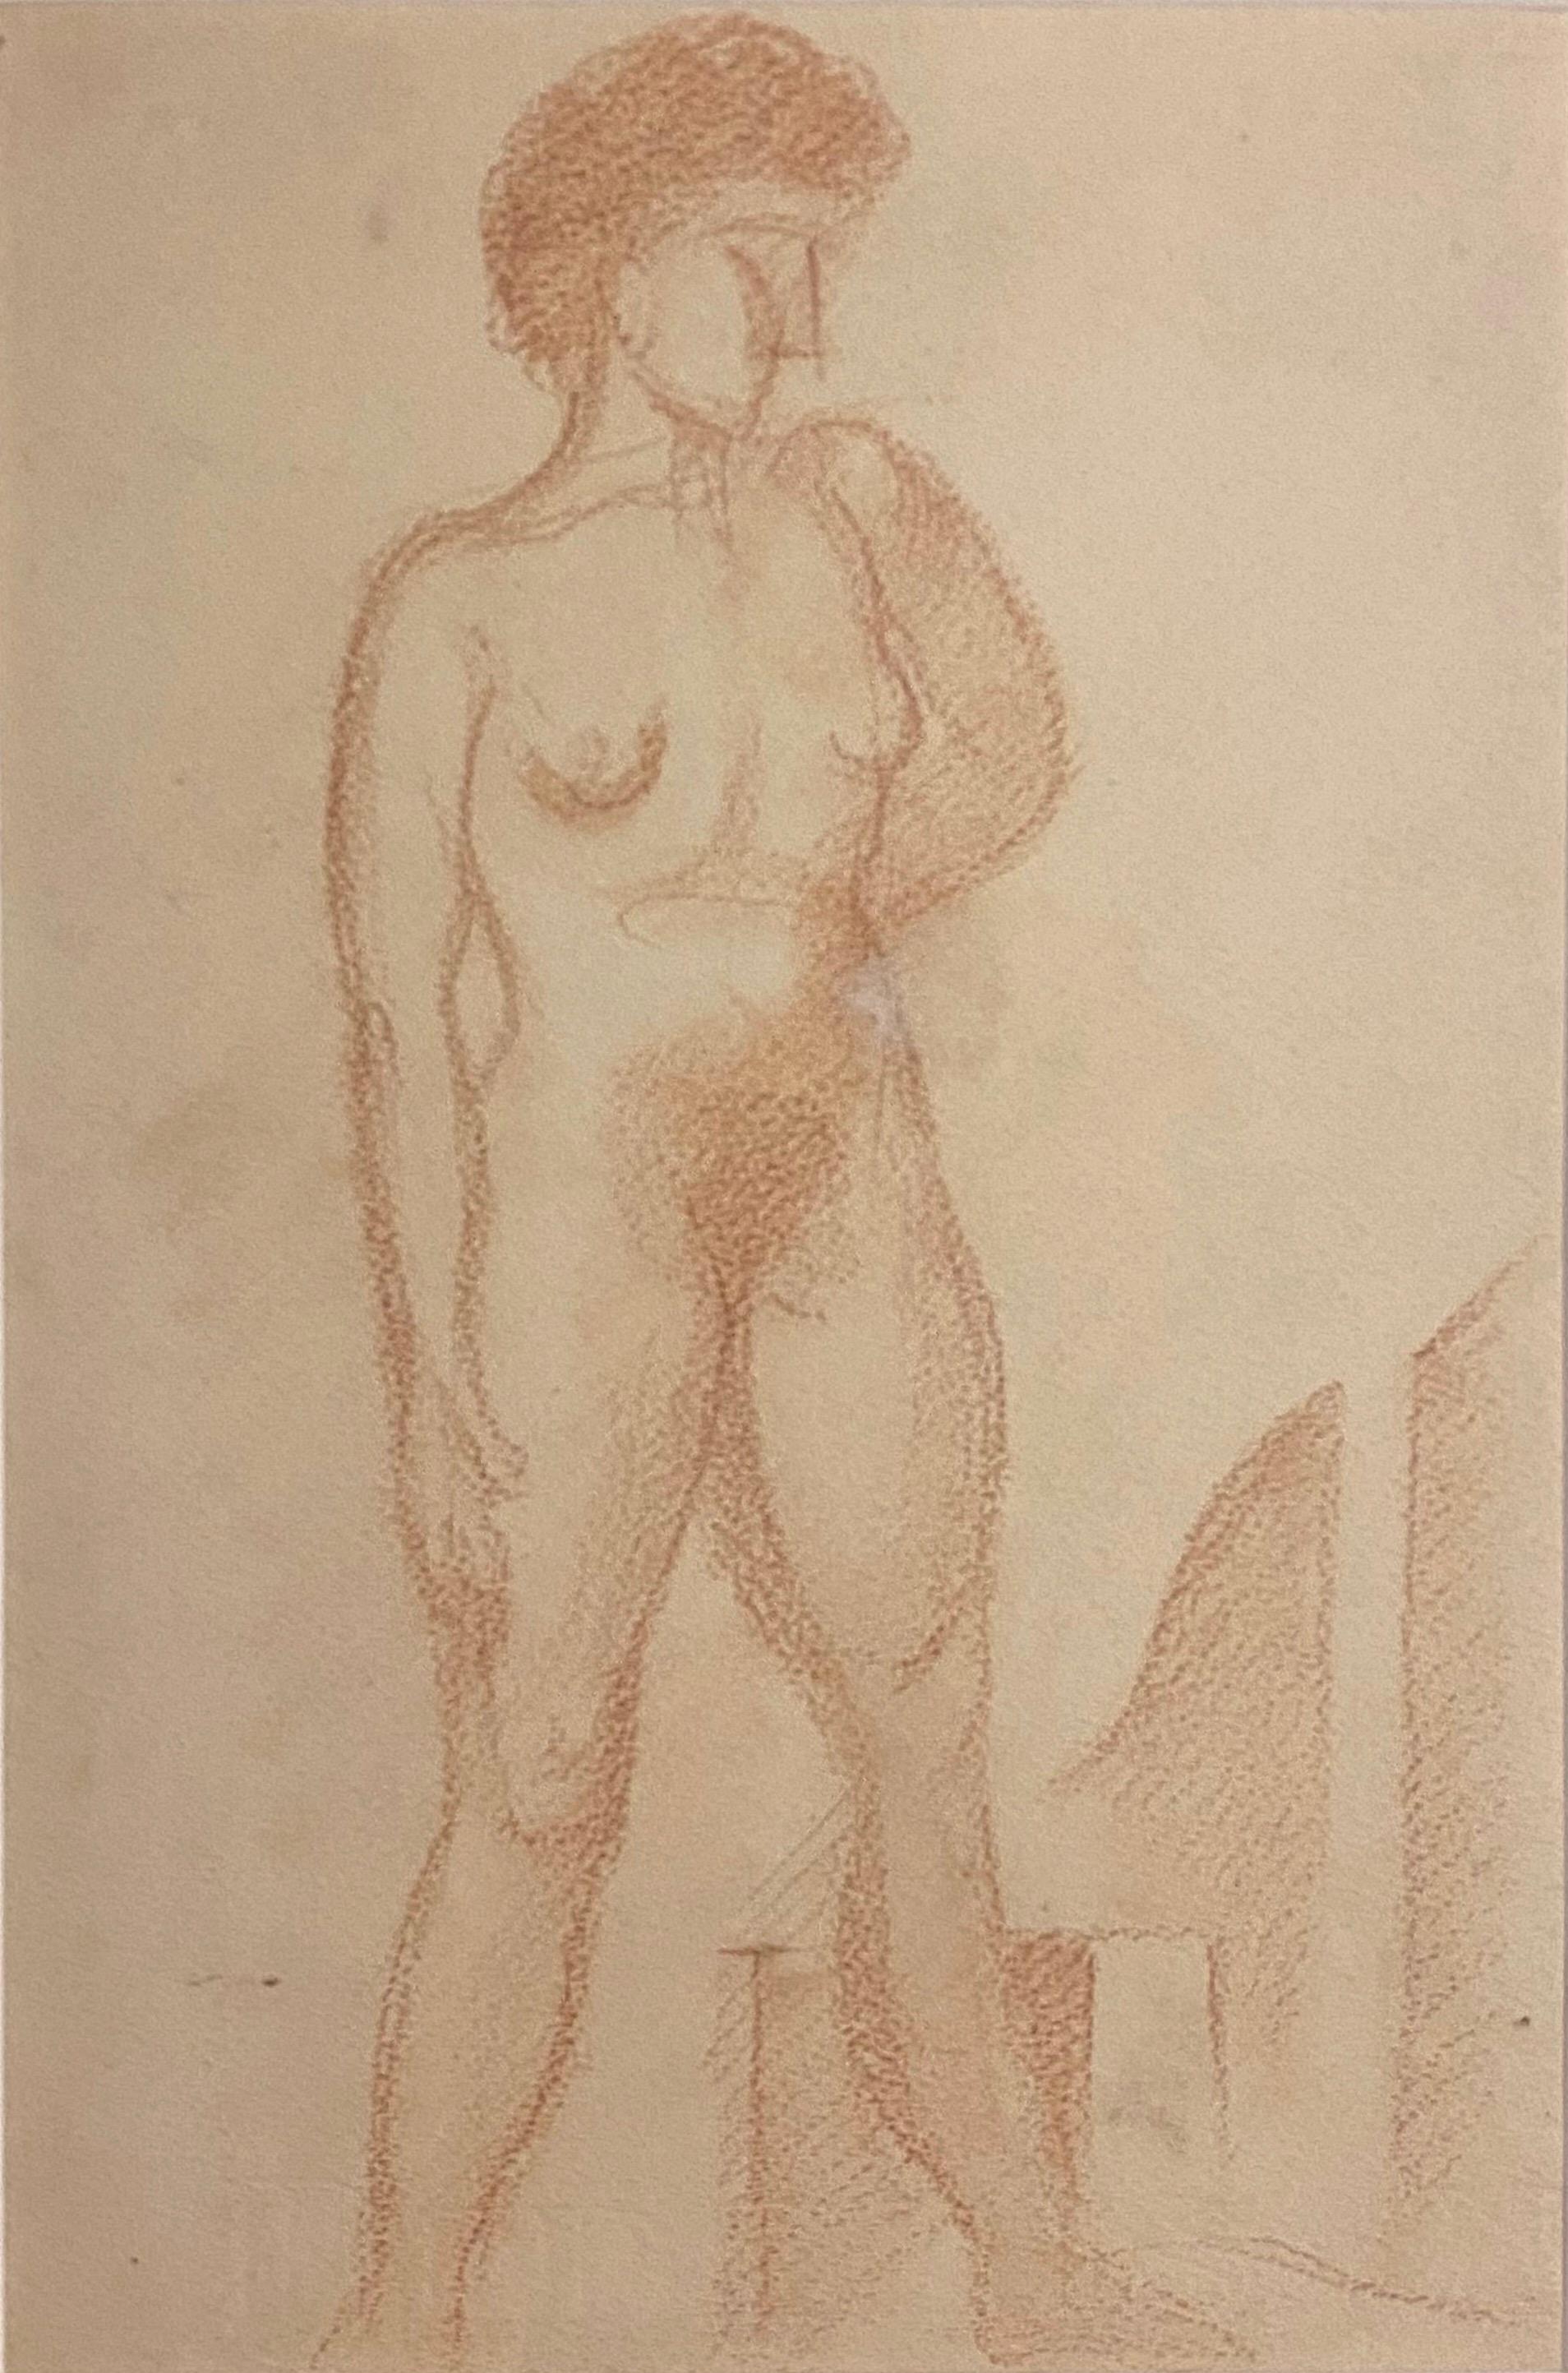 "Nude" is an original drawing in sanguine on paper, realized by Jean Delpech. 

The state of preservation of the artwork is very good.

Included passepartout.

The artwork represents a beautiful figure of a nude woman.

Jean-Raymond Delpech